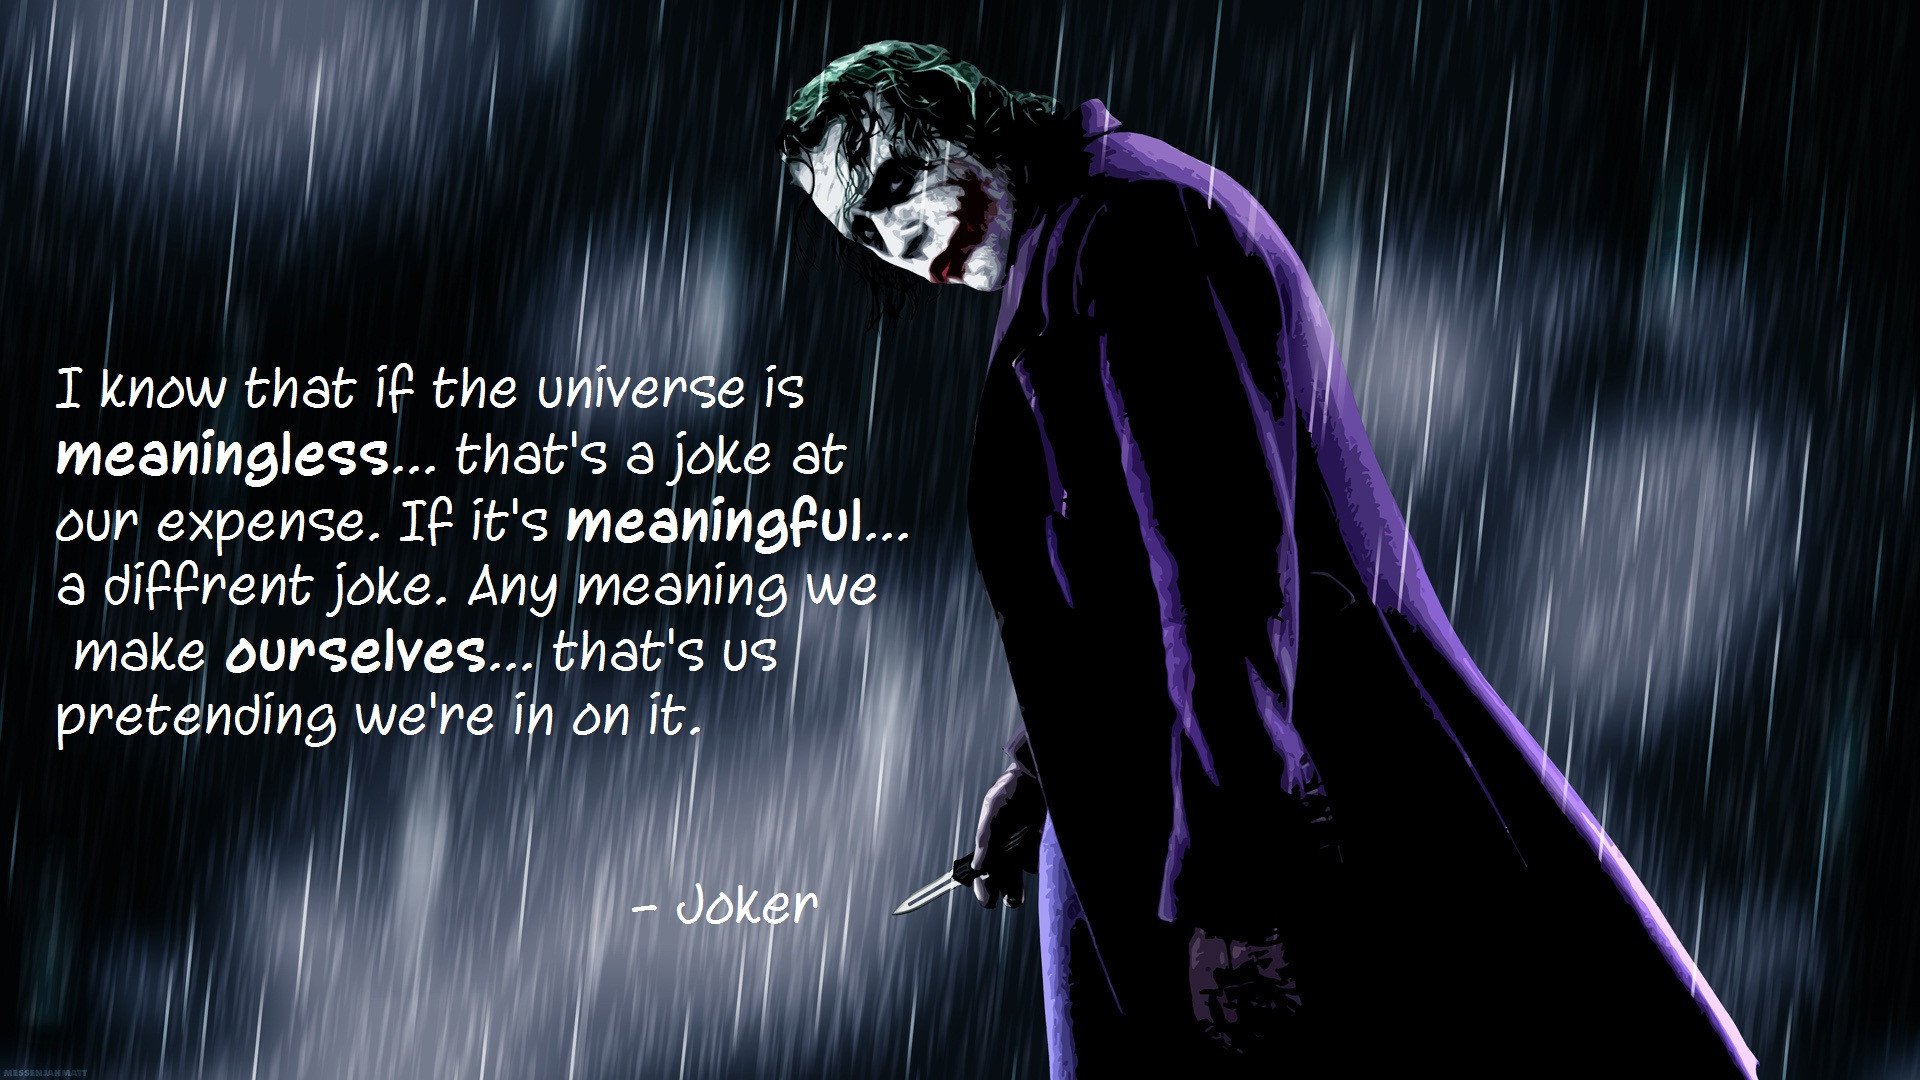 harley quinn and joker quotes